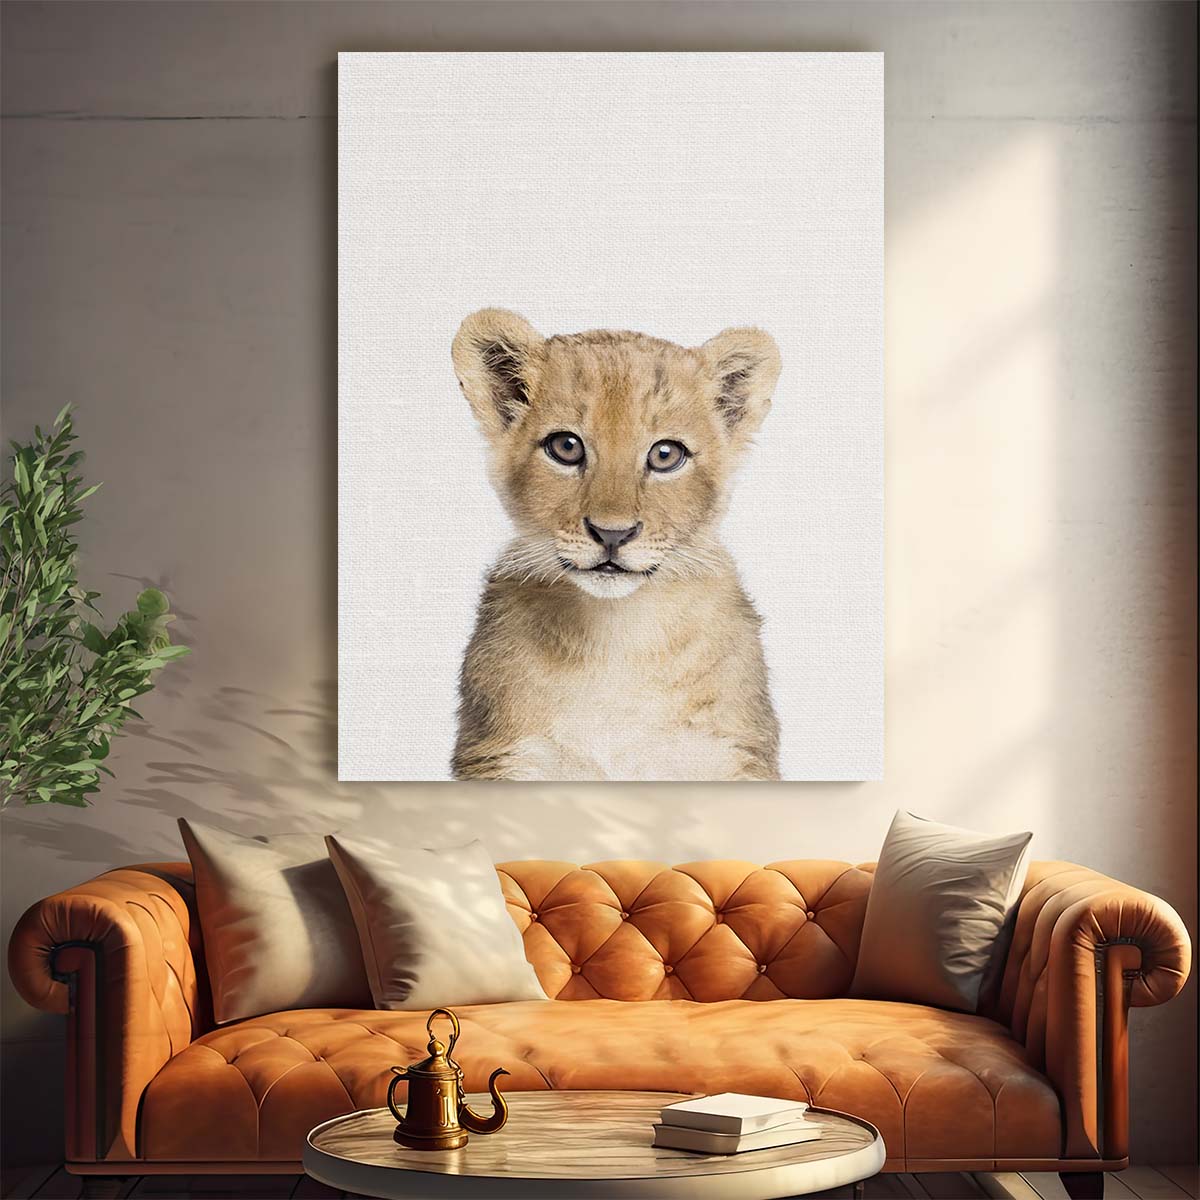 Cute Baby Lion Cub Portrait, Wildlife Photography Wall Art by Luxuriance Designs, made in USA